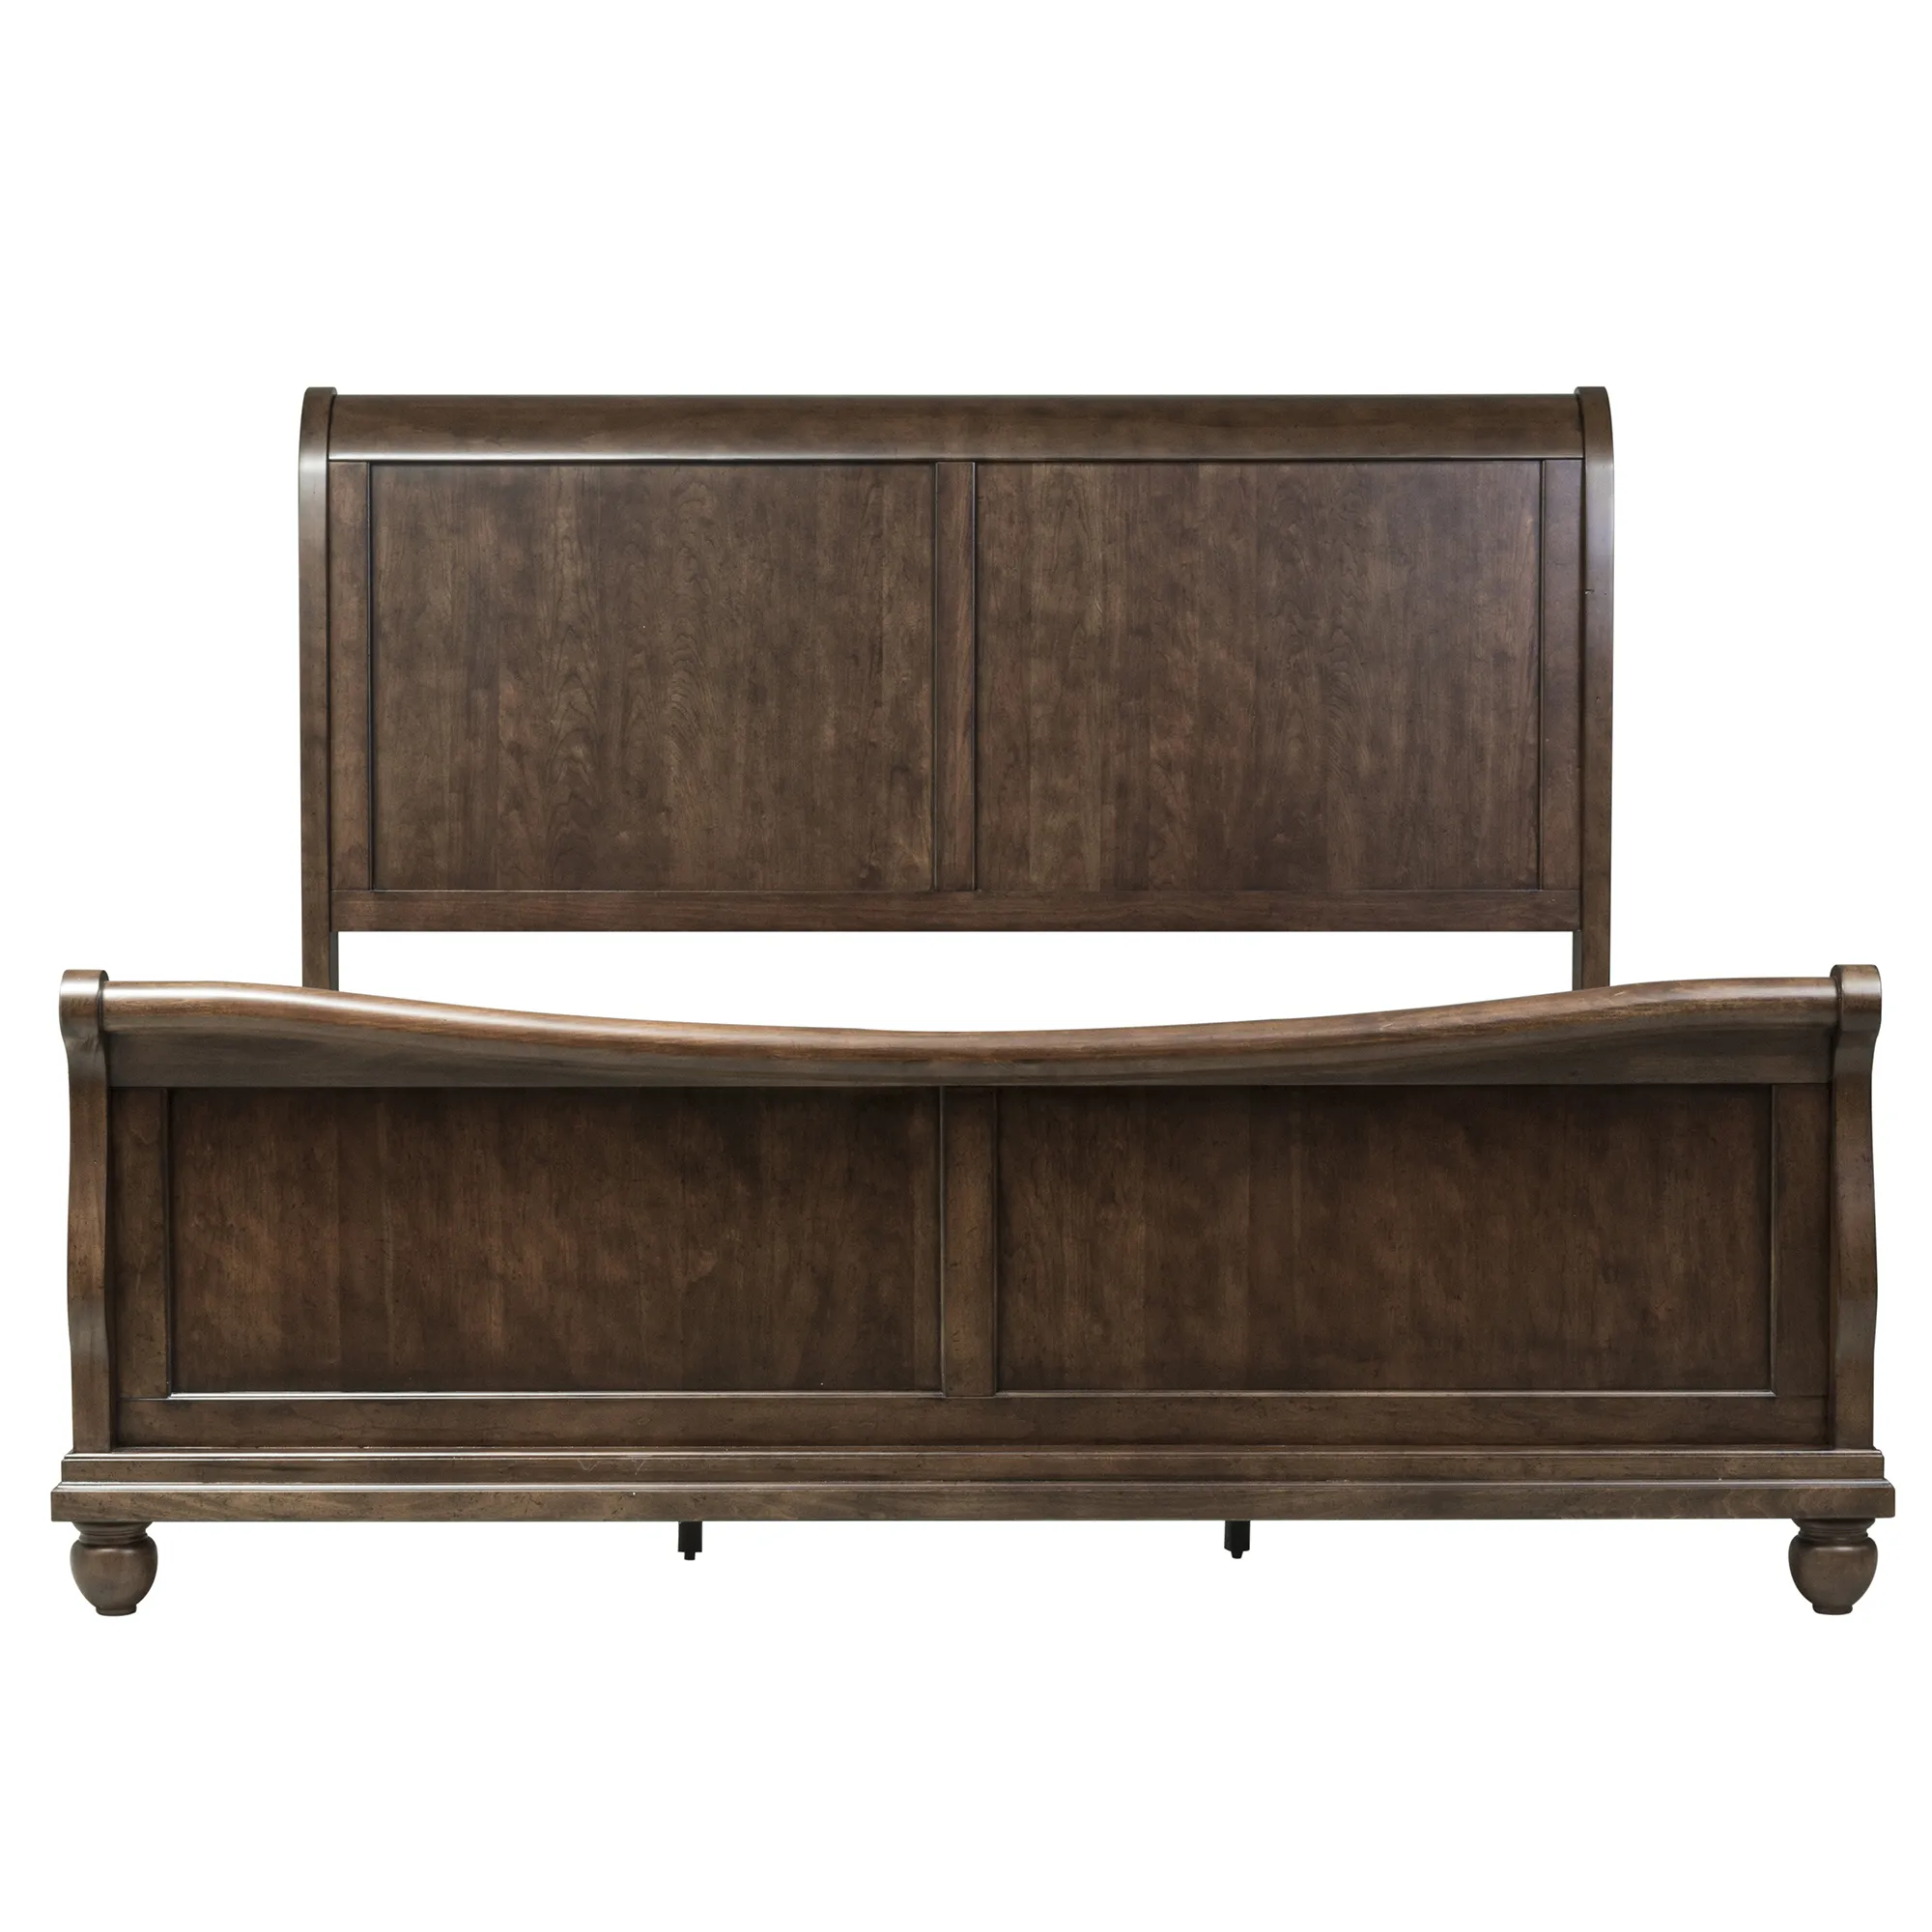 KING SLEIGH BED DRESSER & MIRROR CHEST - RUSTIC TRADITIONS